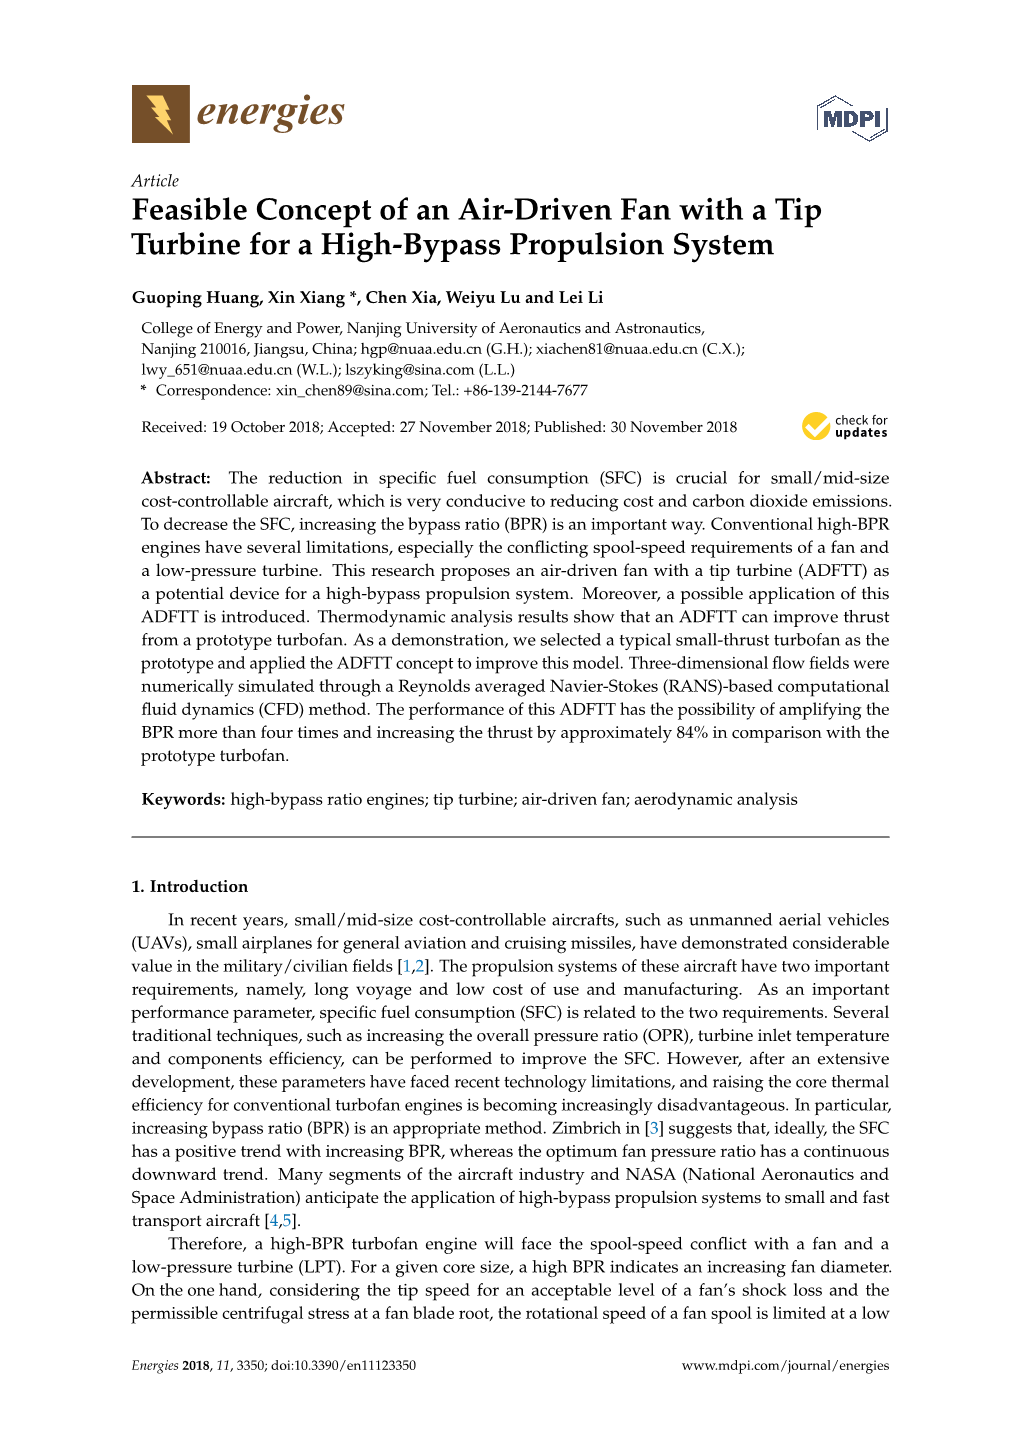 Feasible Concept of an Air-Driven Fan with a Tip Turbine for a High-Bypass Propulsion System